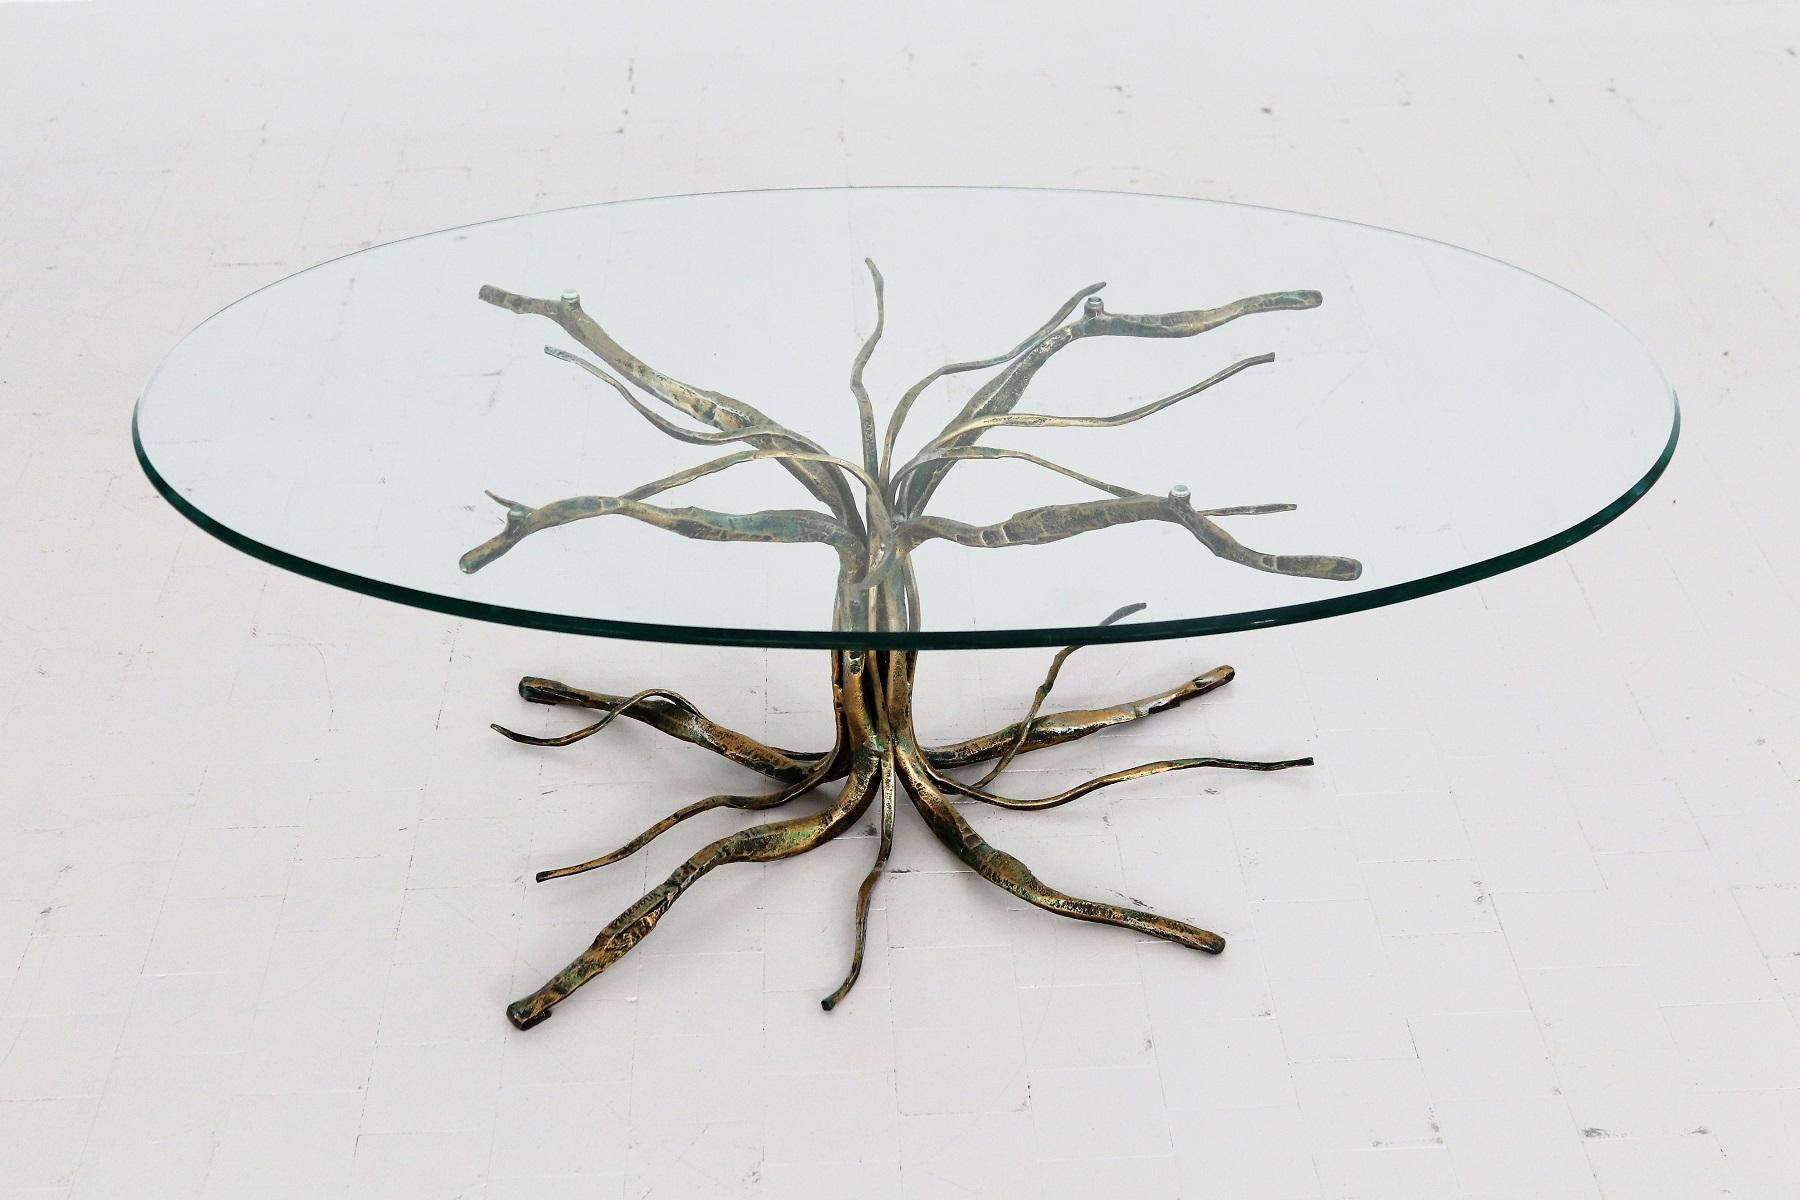 Italian Brutalist Coffee Table in Tree Shape by Salvino Marsura 1960s For Sale 12